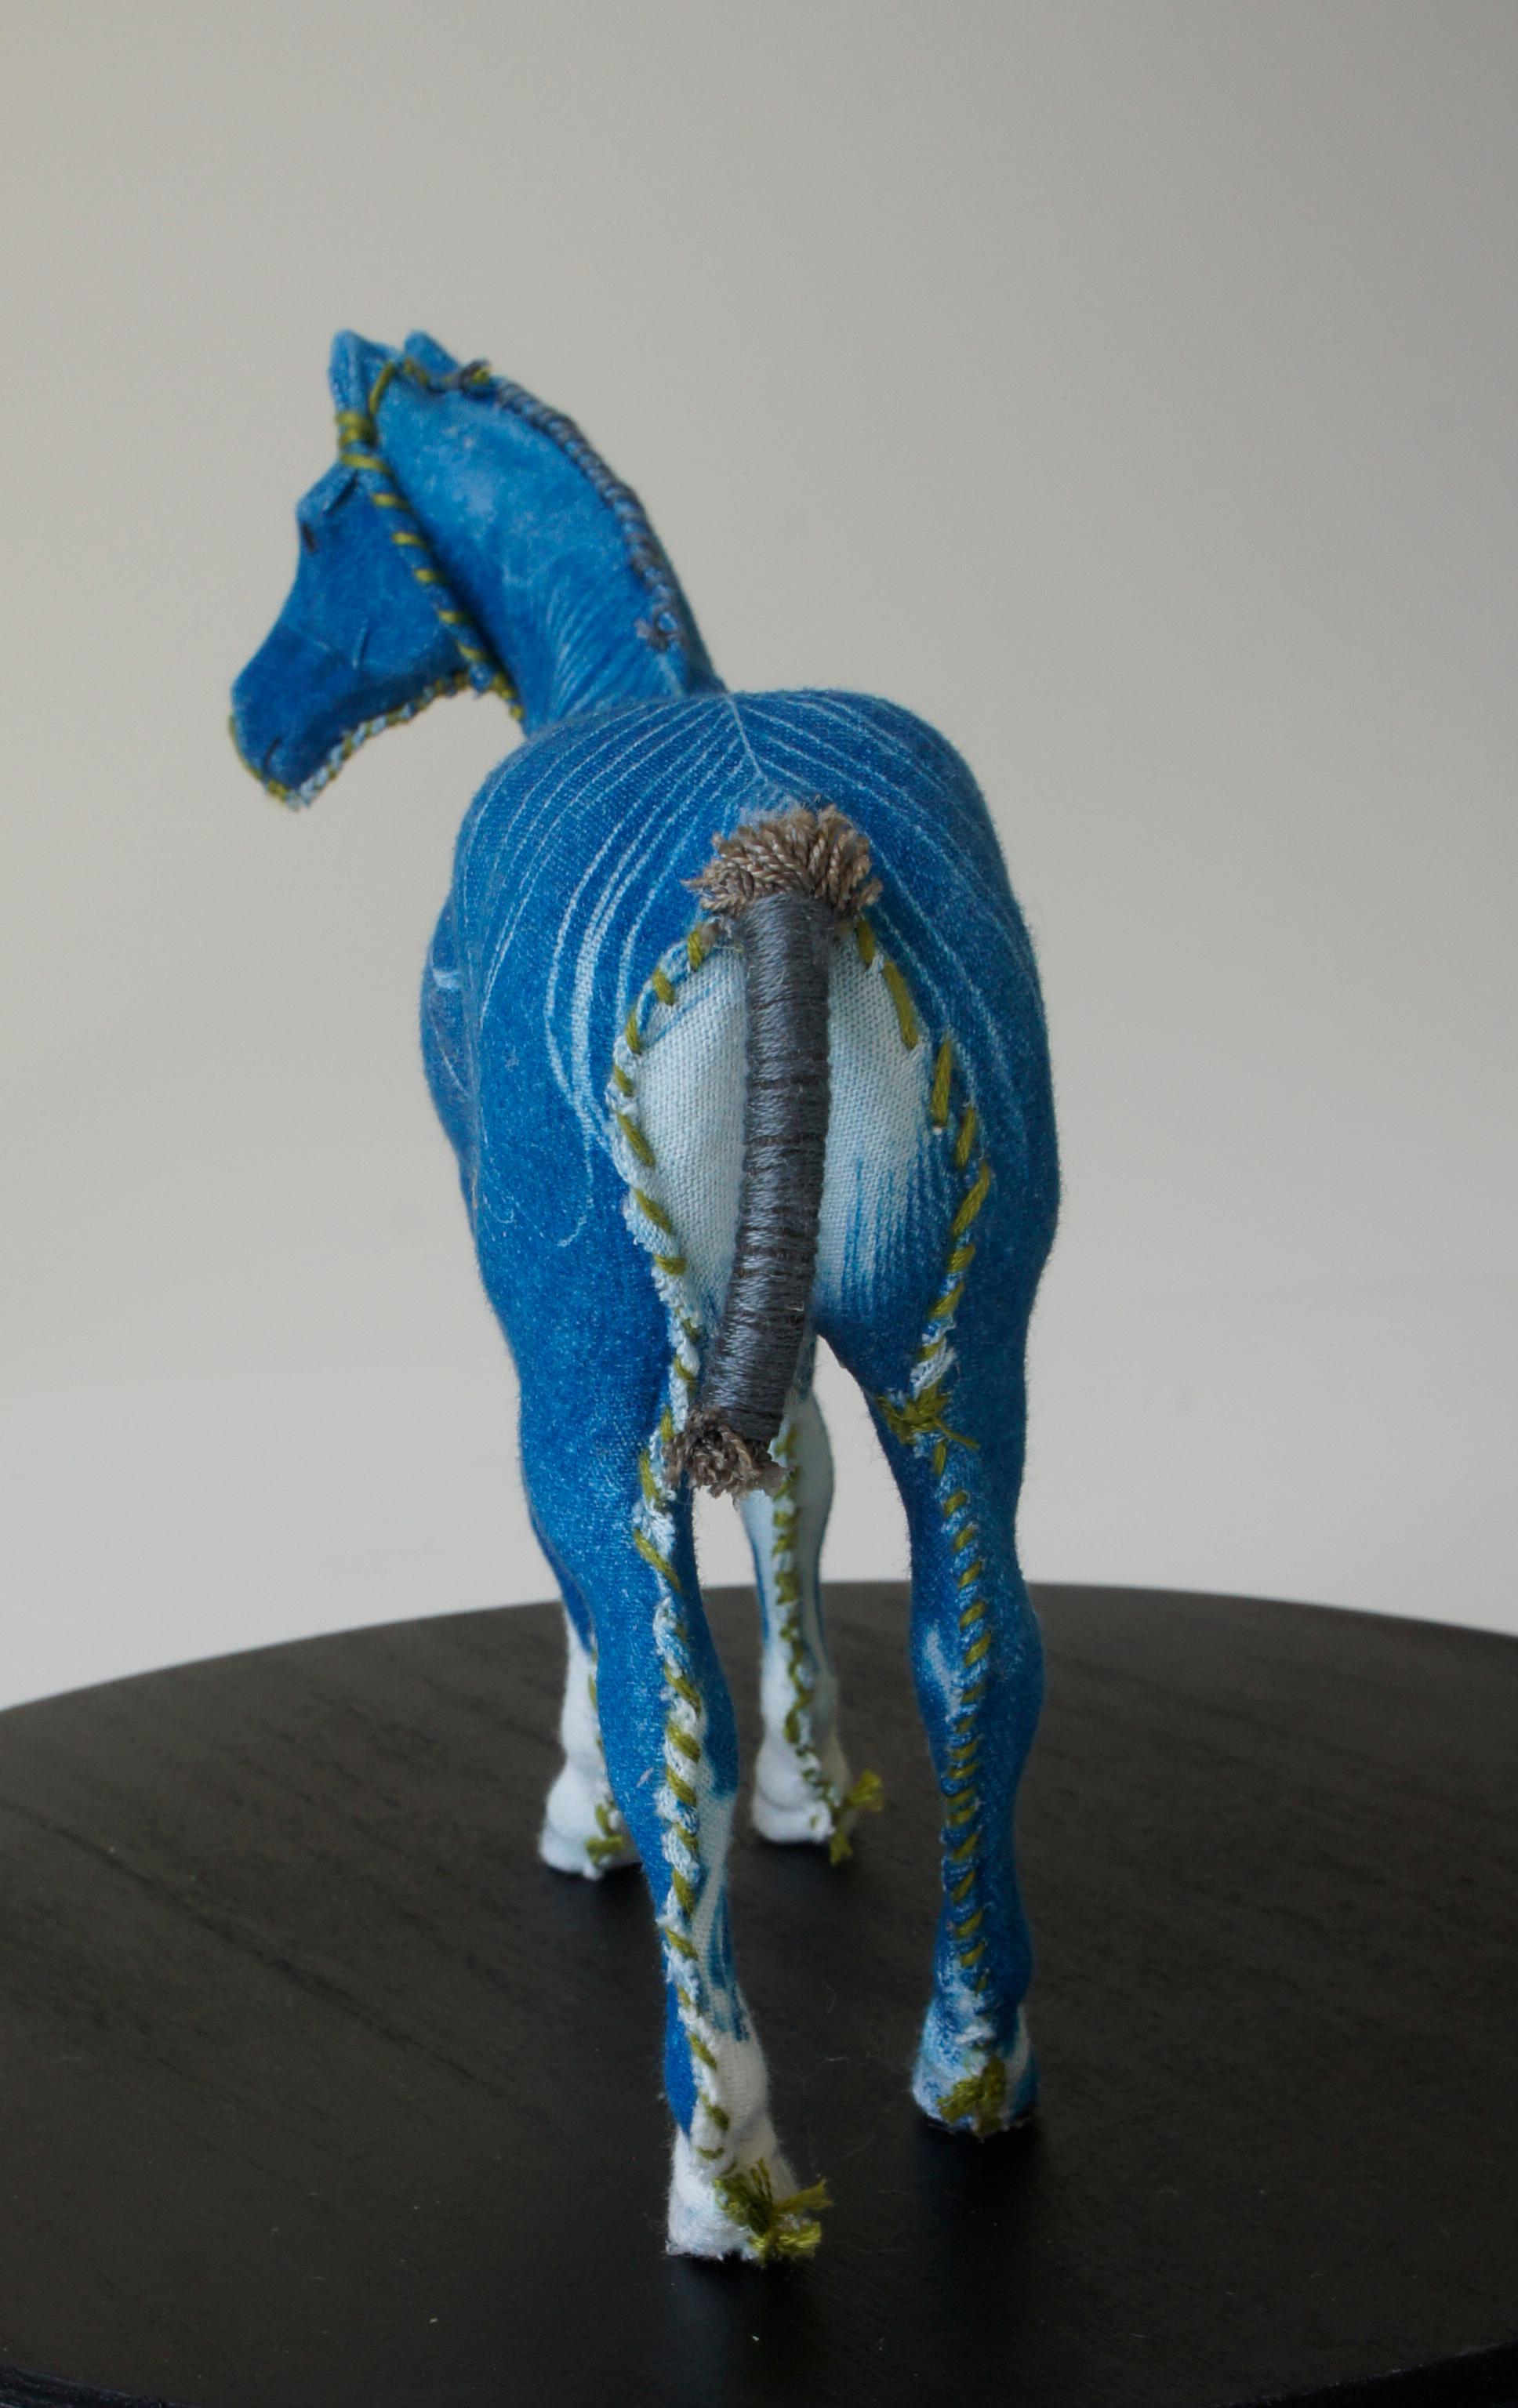 Miniature horse under glass dome: 'simple cyanotype horse- miniature' - Contemporary Mixed Media Art by Gin Stone